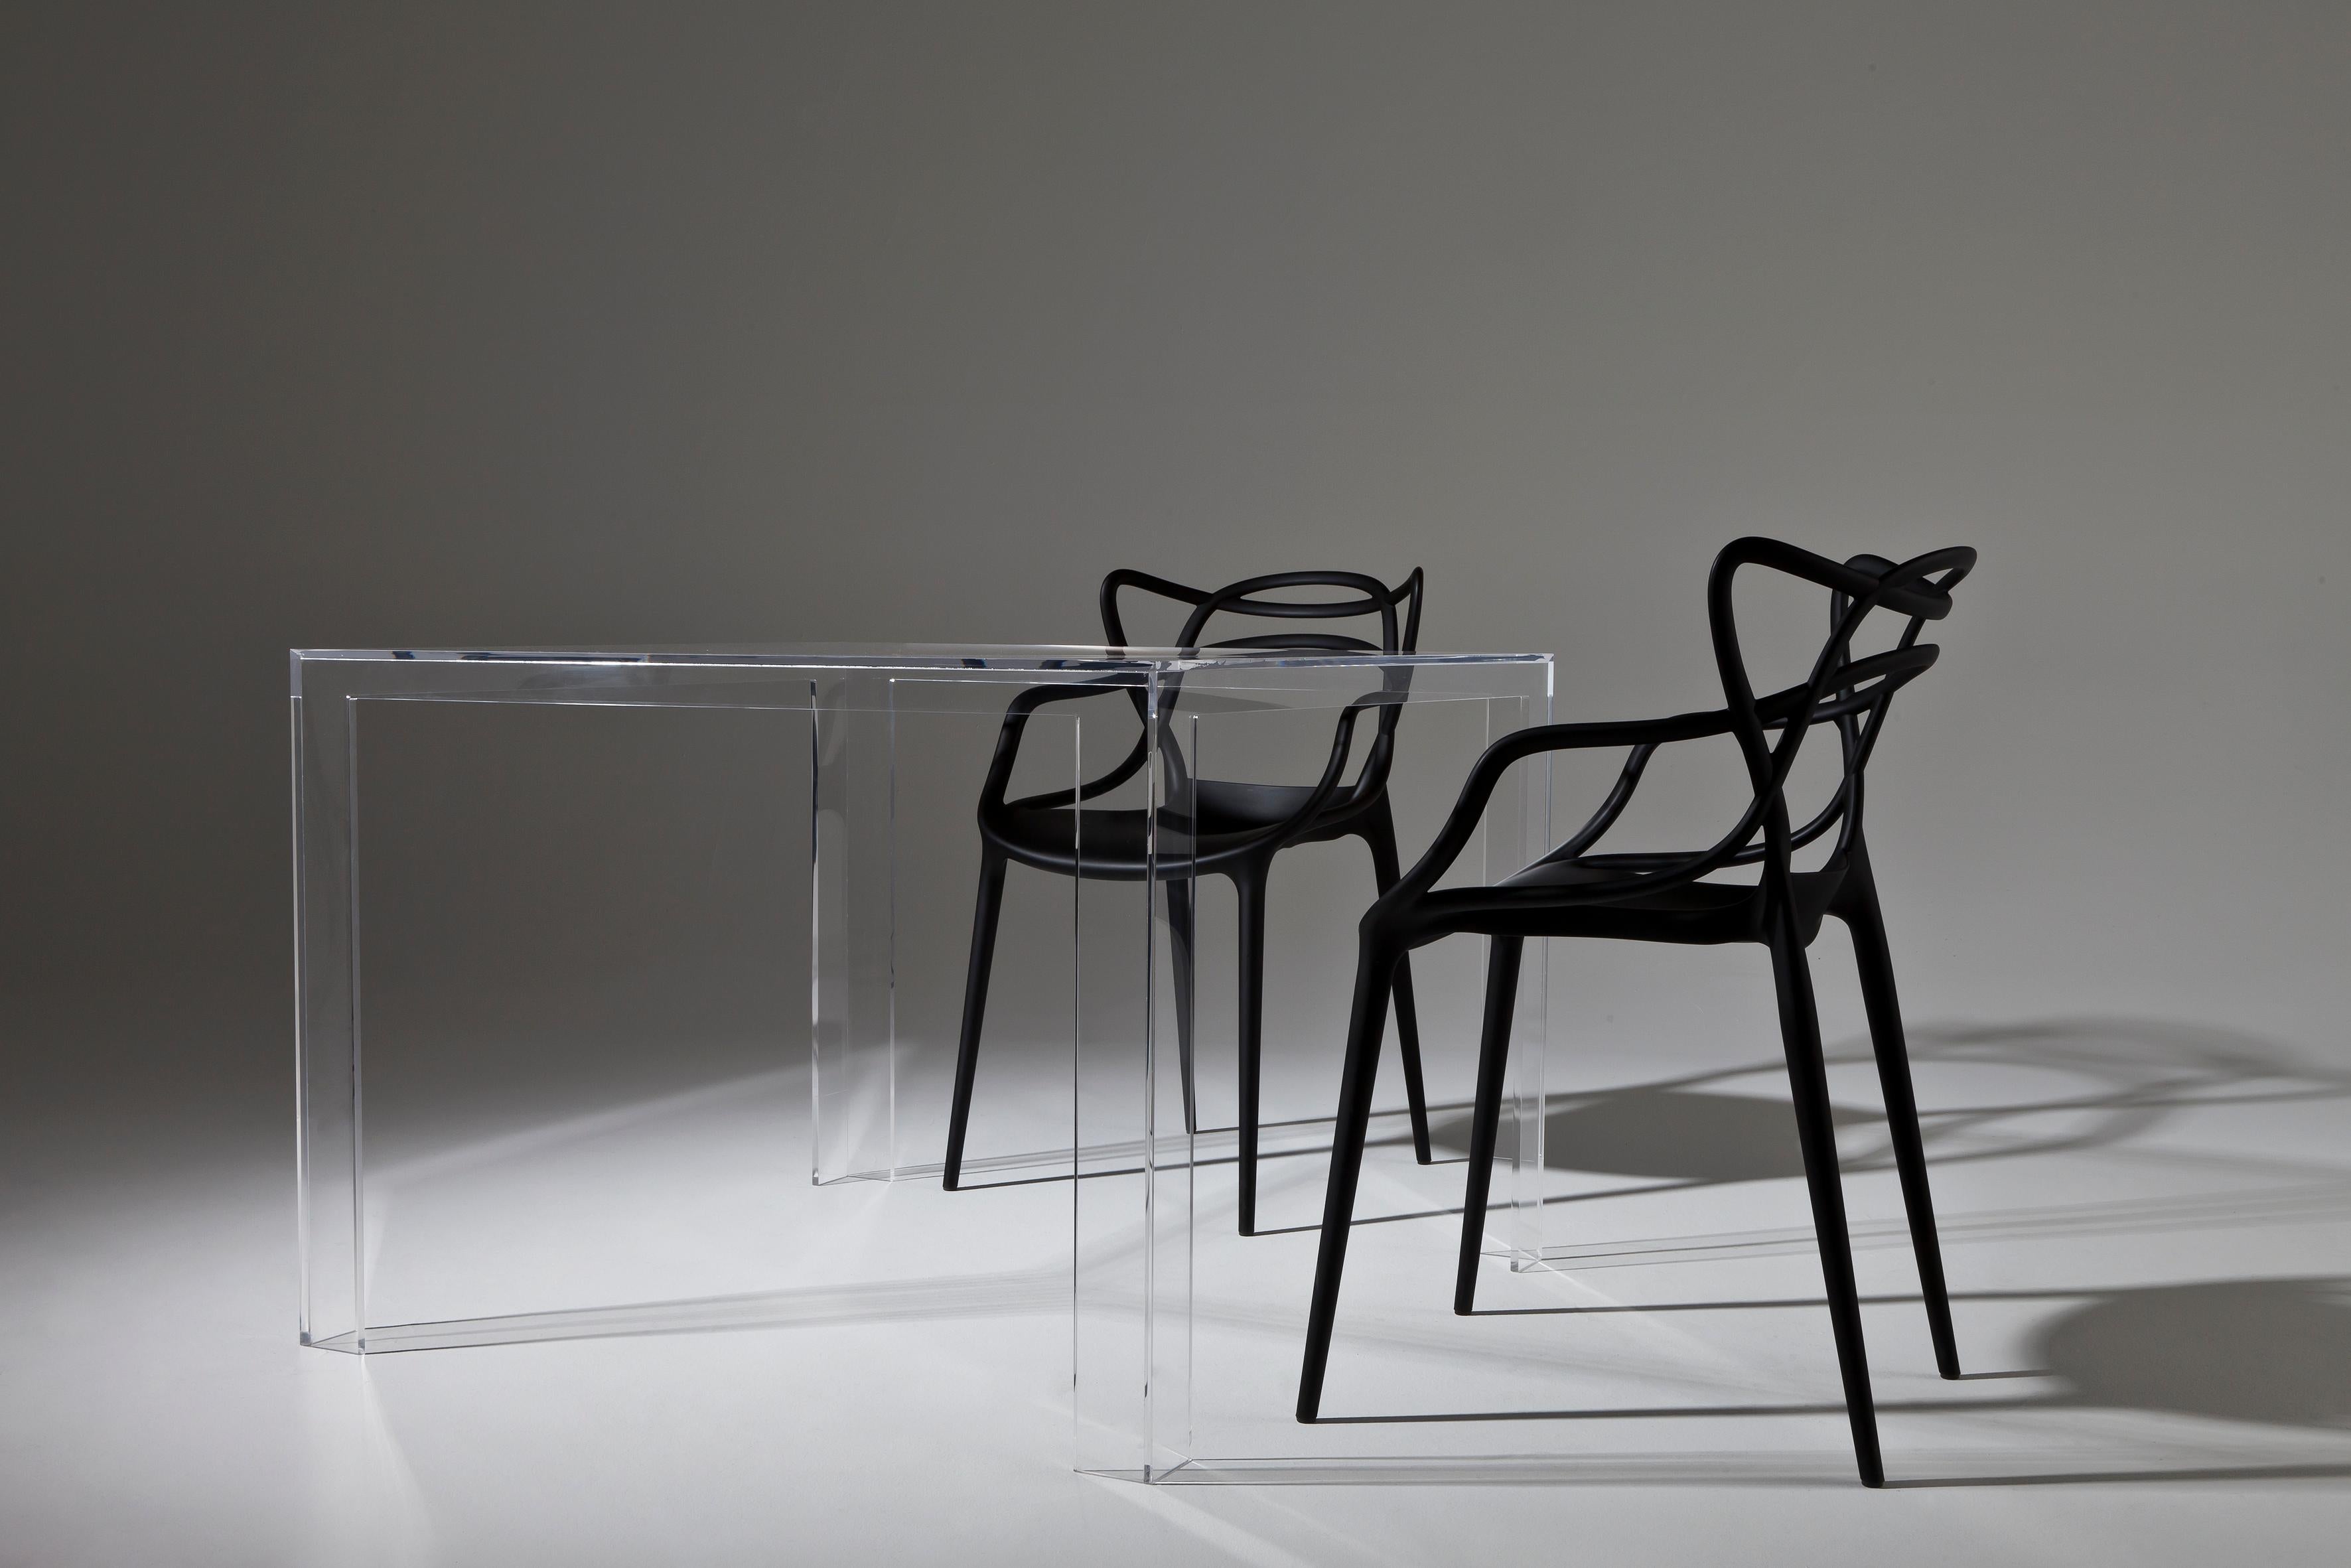 Invisible Table designed by Tokujin Yoshioka combines lightness and solidity, grace and elegance and practicality and style. Its simplicity and purity of form makes it adaptable to any environment. Its sophisticated palette of colours ranging from